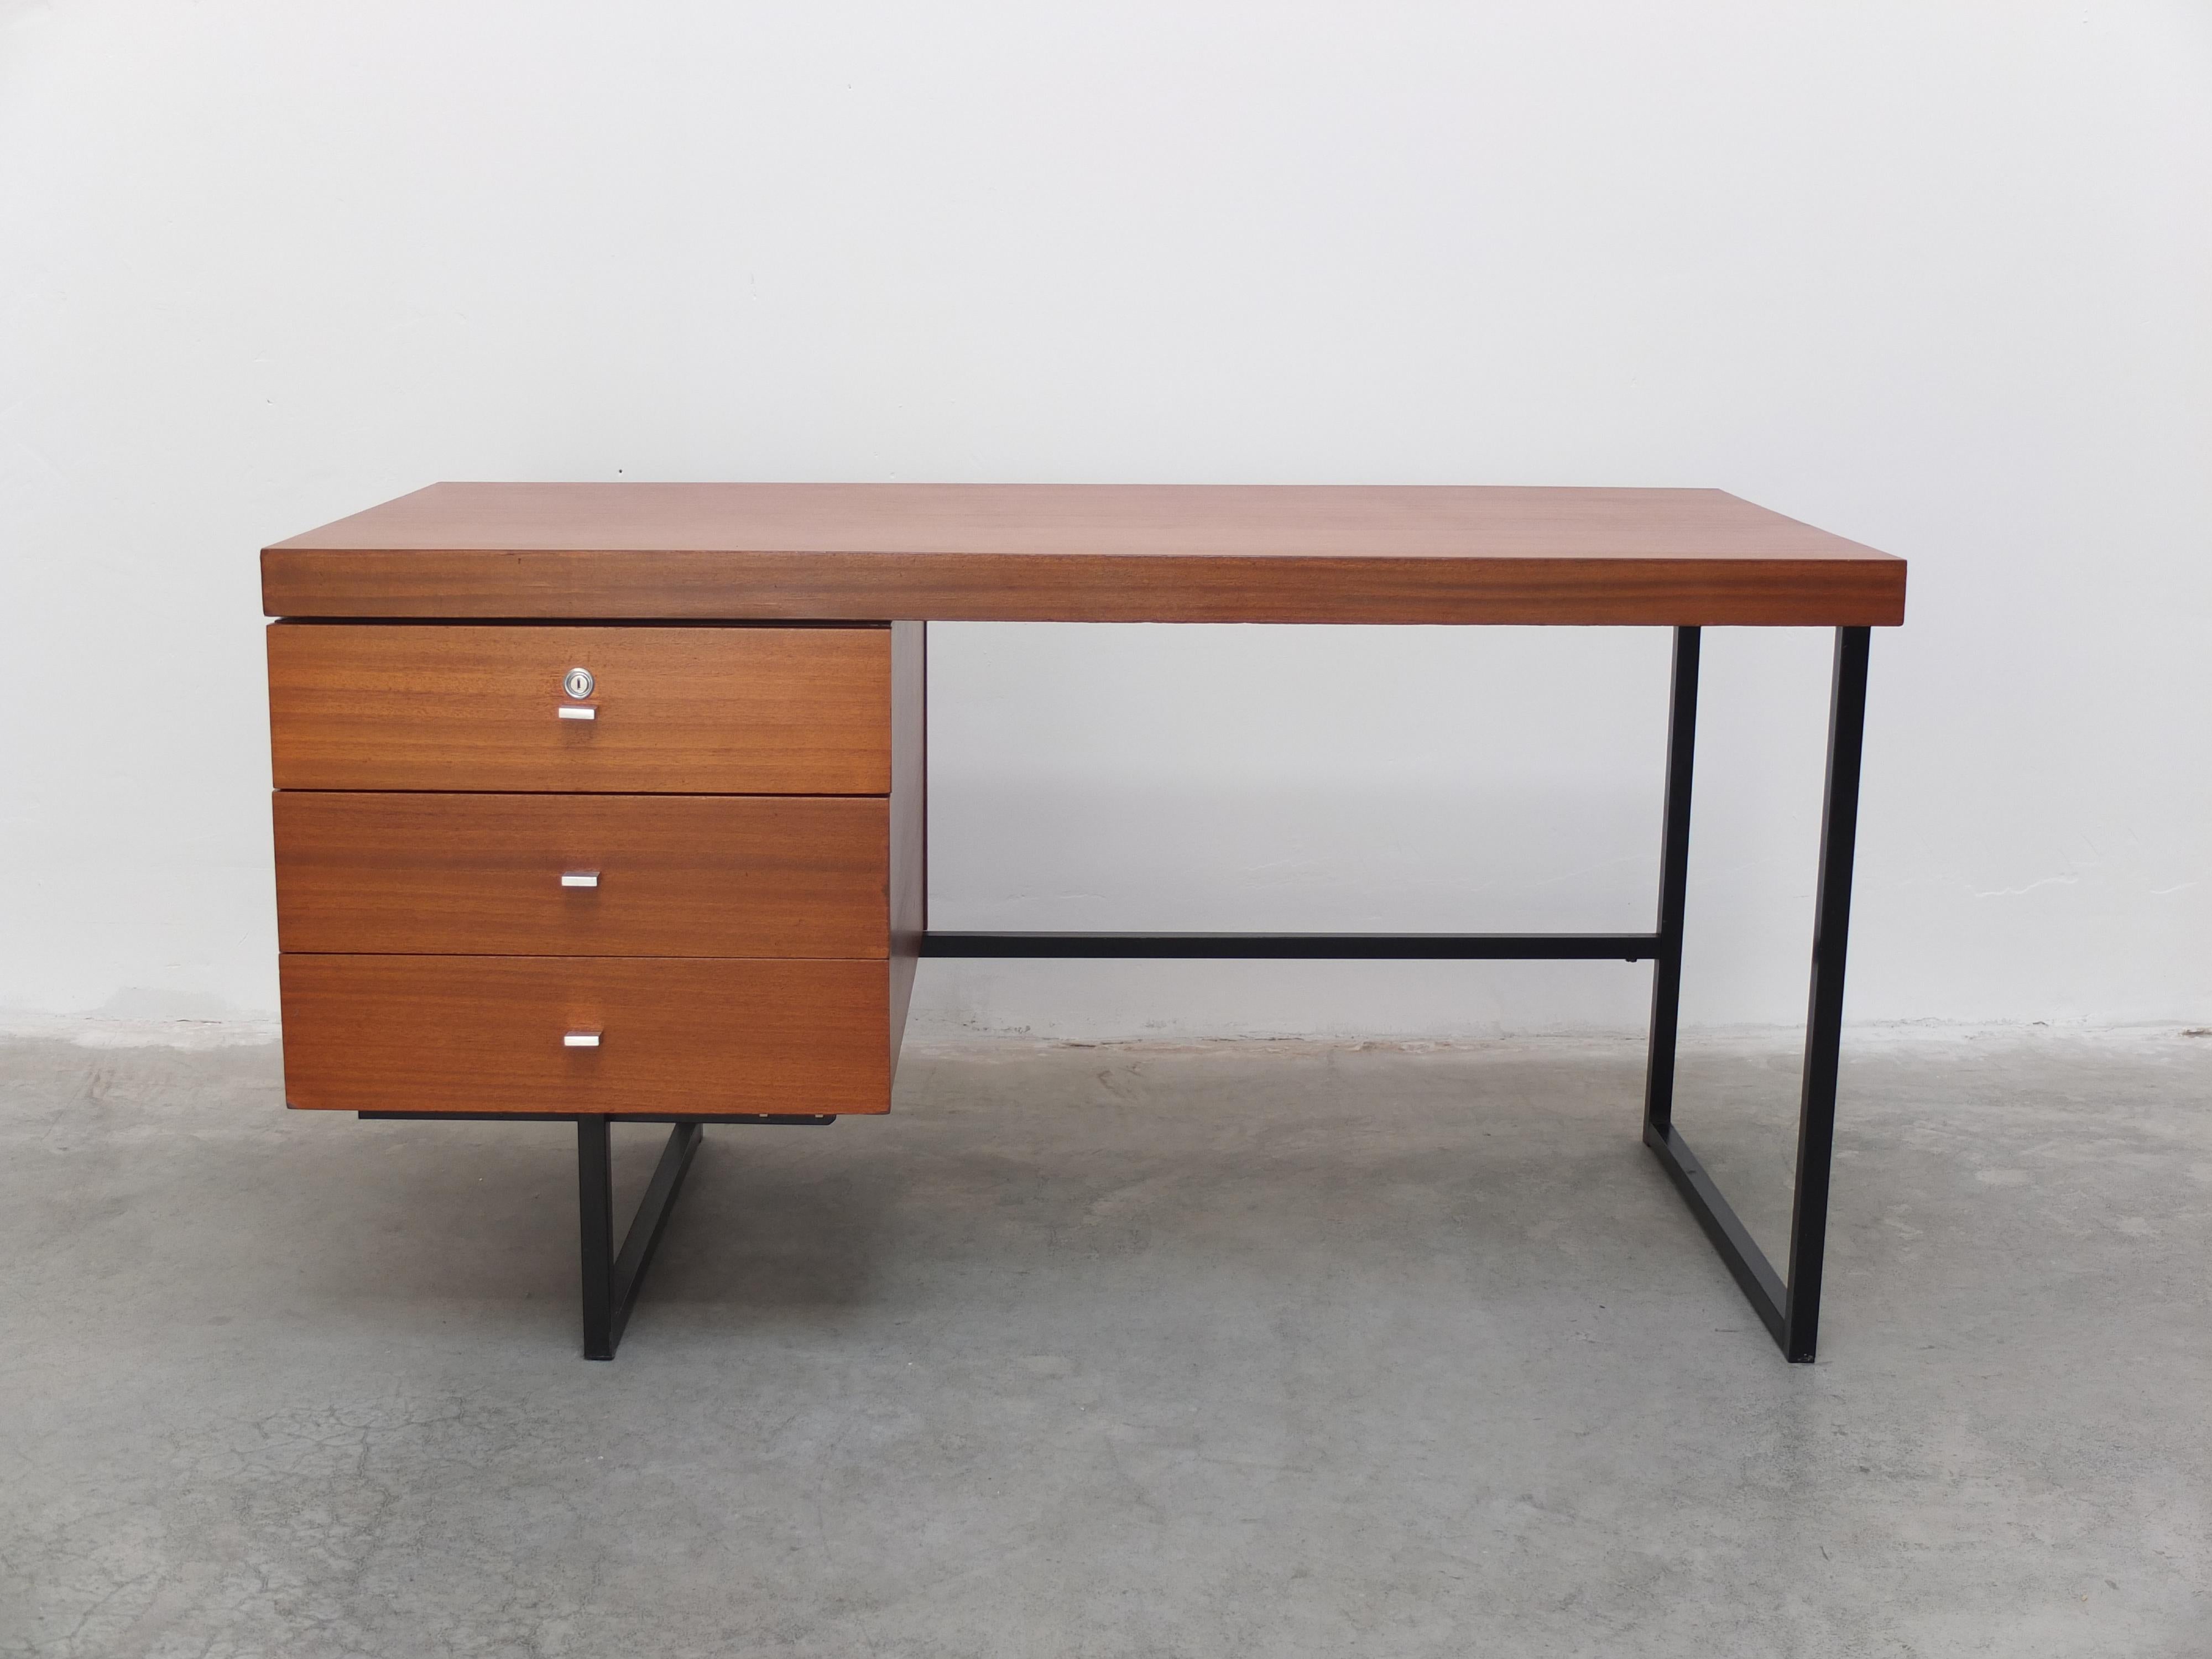 Nice minimalistic ‘Standard’ writing desk designed by Pierre Guariche in 1961 and produced by Meurop in Belgium. Made of warm teak wood with a modernist touch thanks to the black lacquered metal frame and aluminum handles. In very good restored